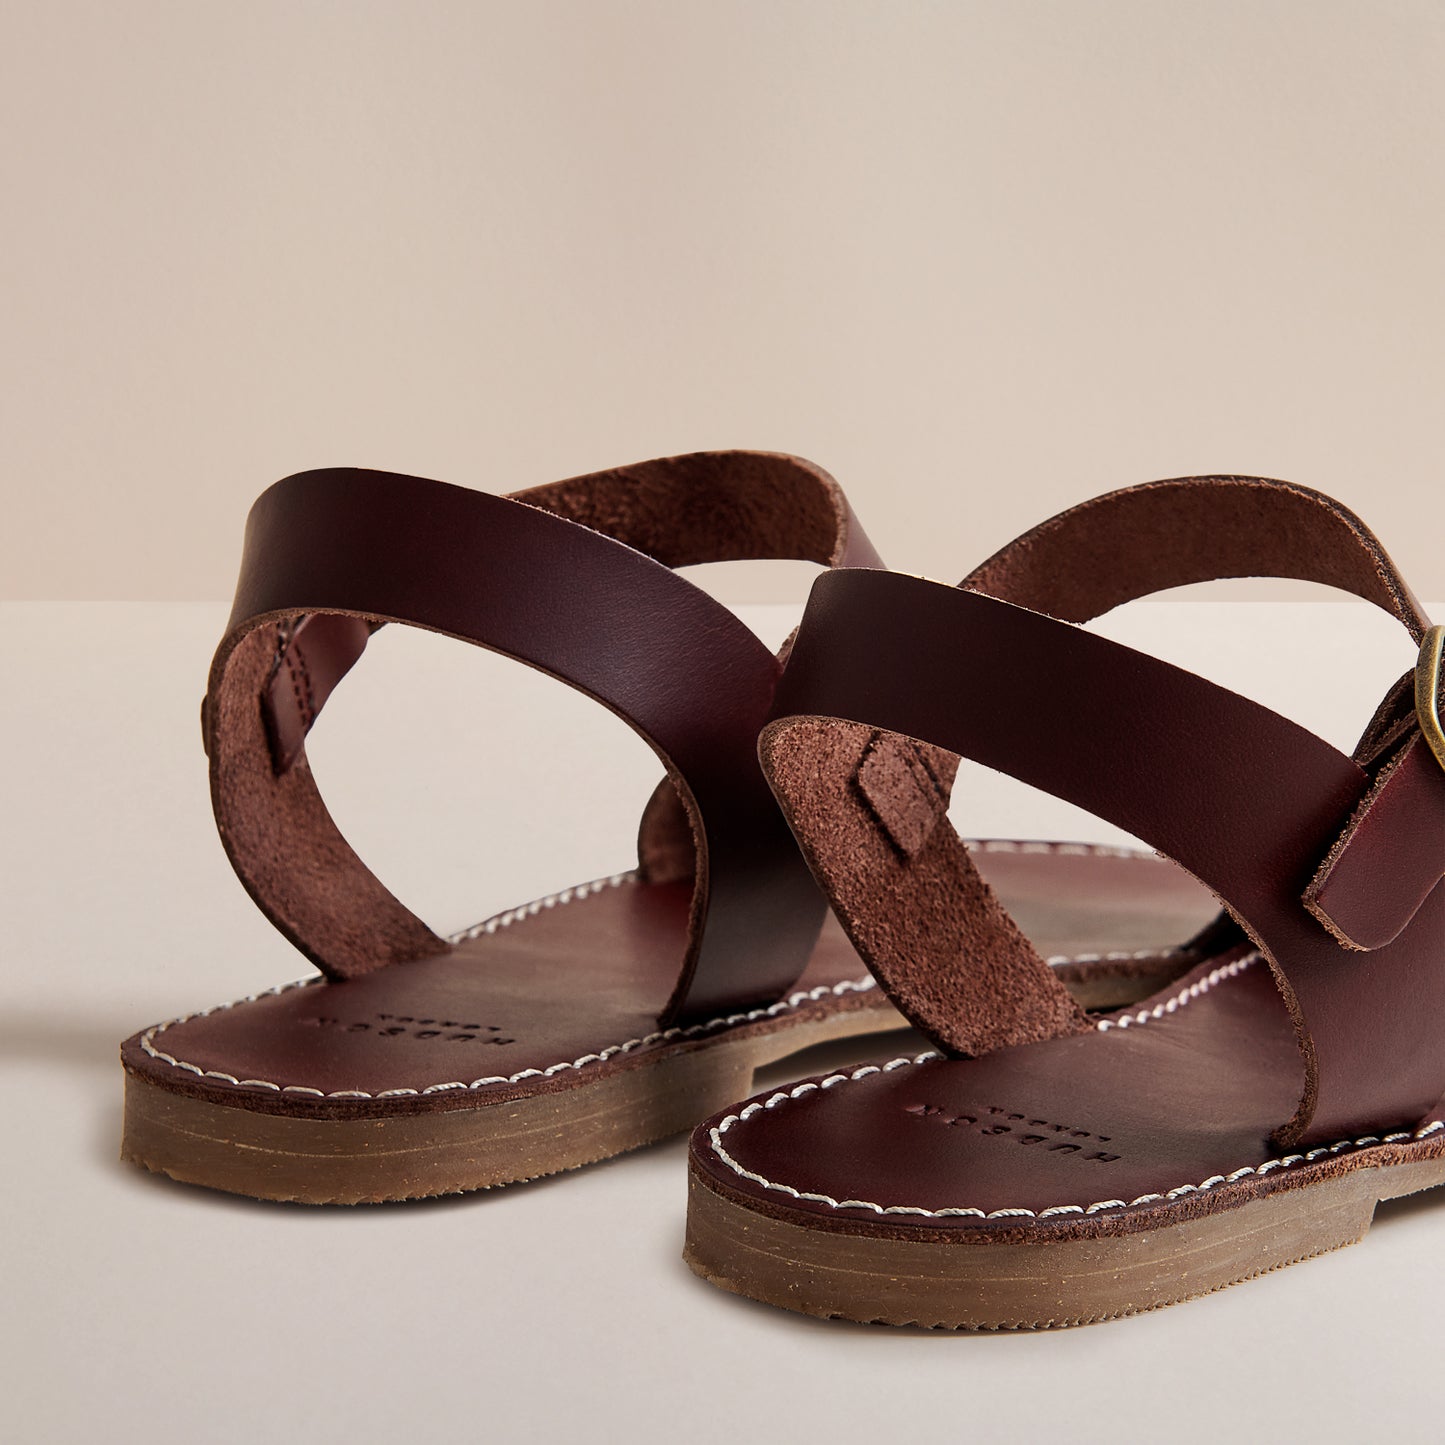 ROSEMARY BROWN LEATHER SANDAL